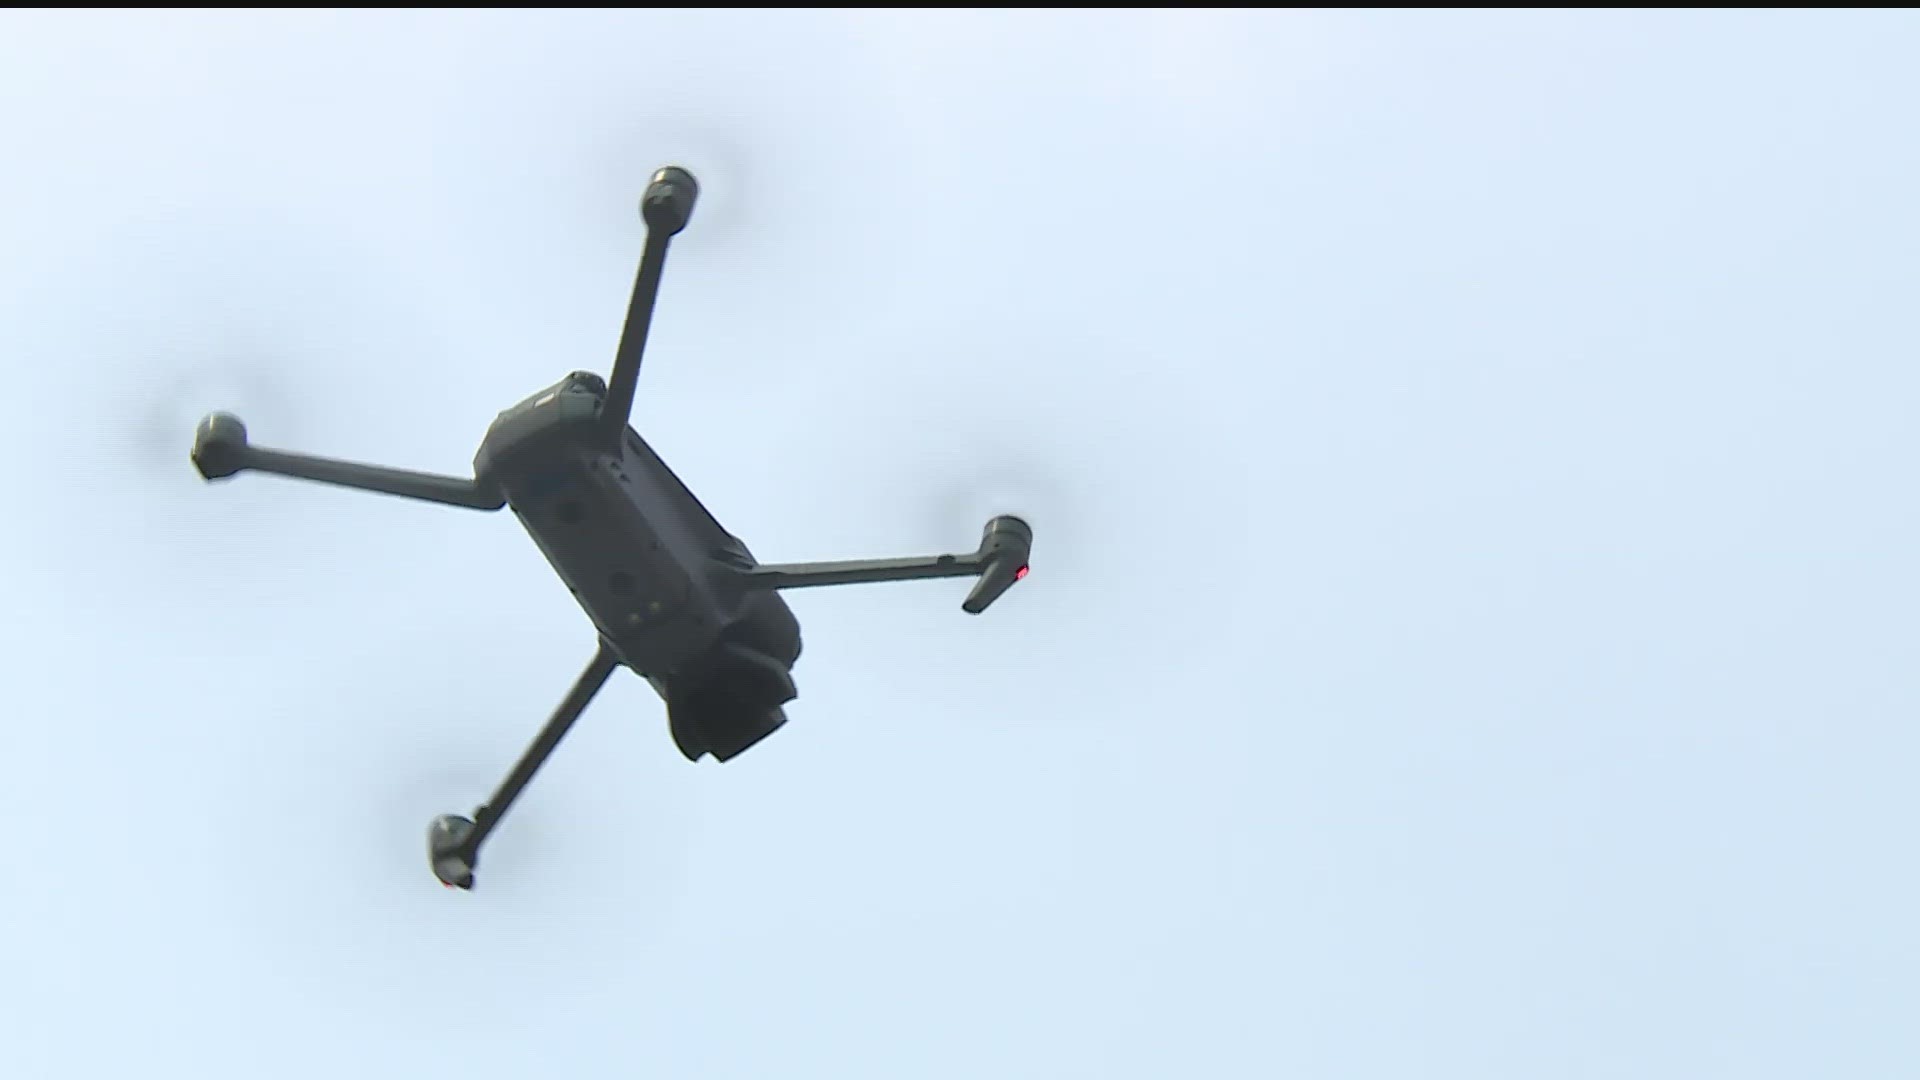 State Patrol says a drone came close to colliding with one of their helicopters late Tuesday night in Minneapolis.